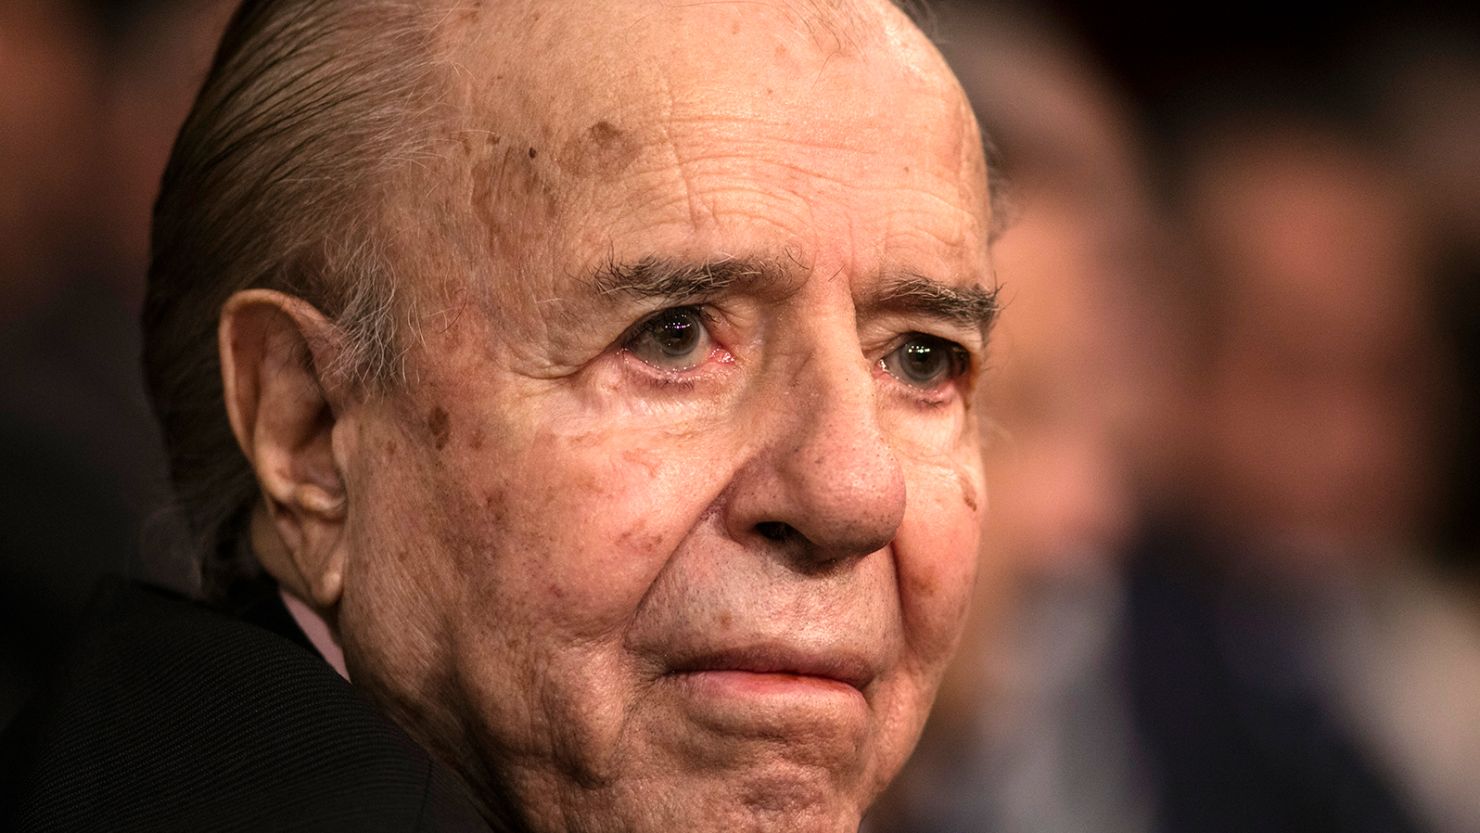 Former President Carlos Menem looks on during the opening session of the 138th period of the Argentine Congress on March 01, 2020, in Buenos Aires, Argentina.